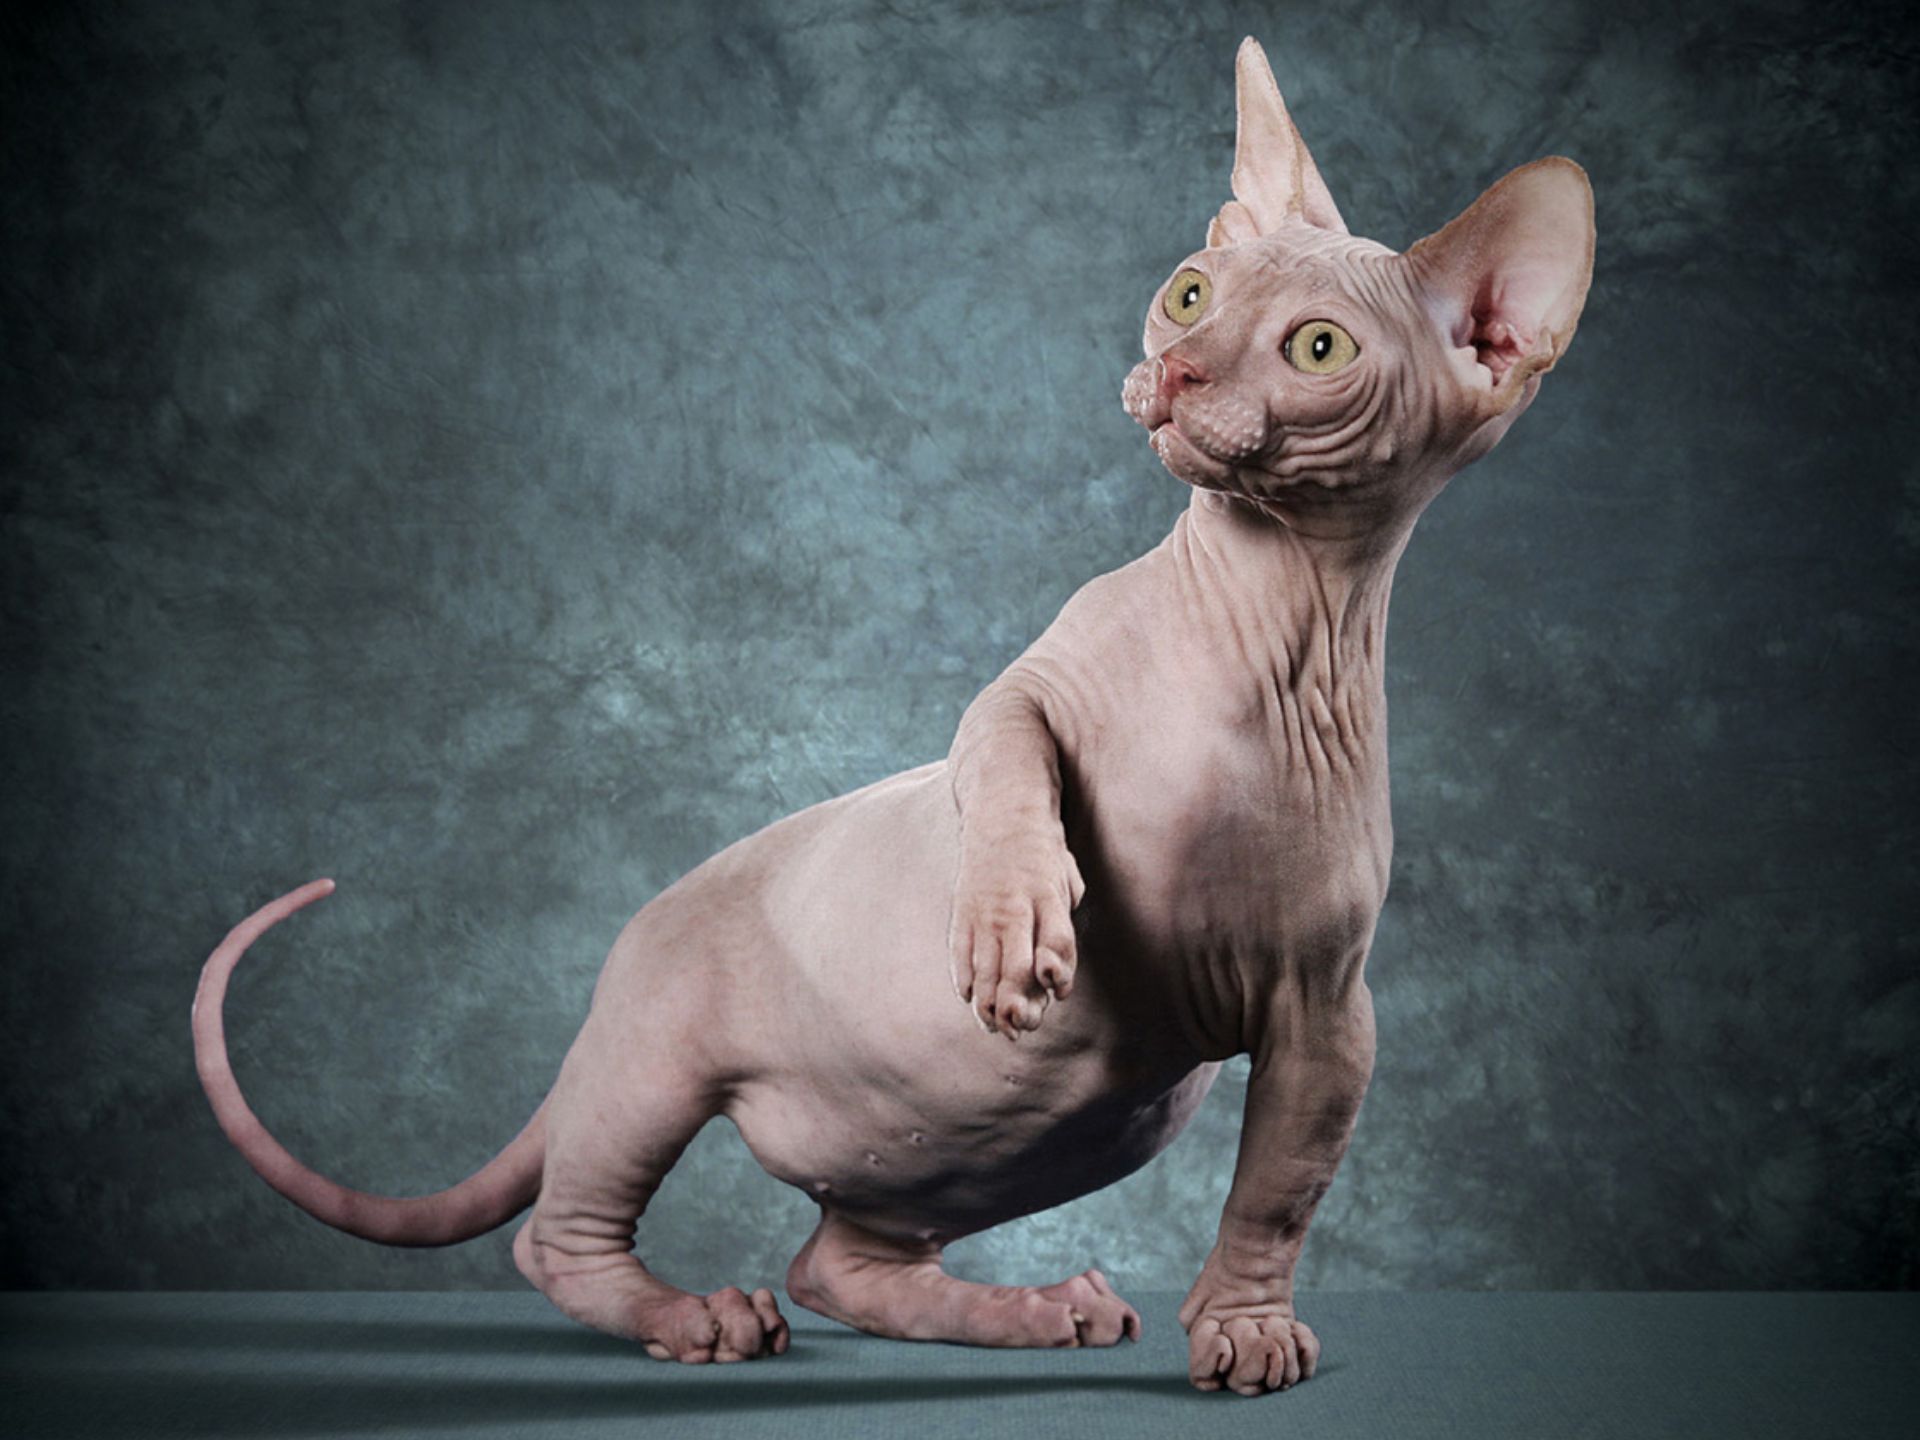 Full size picture - Hairless cat. 